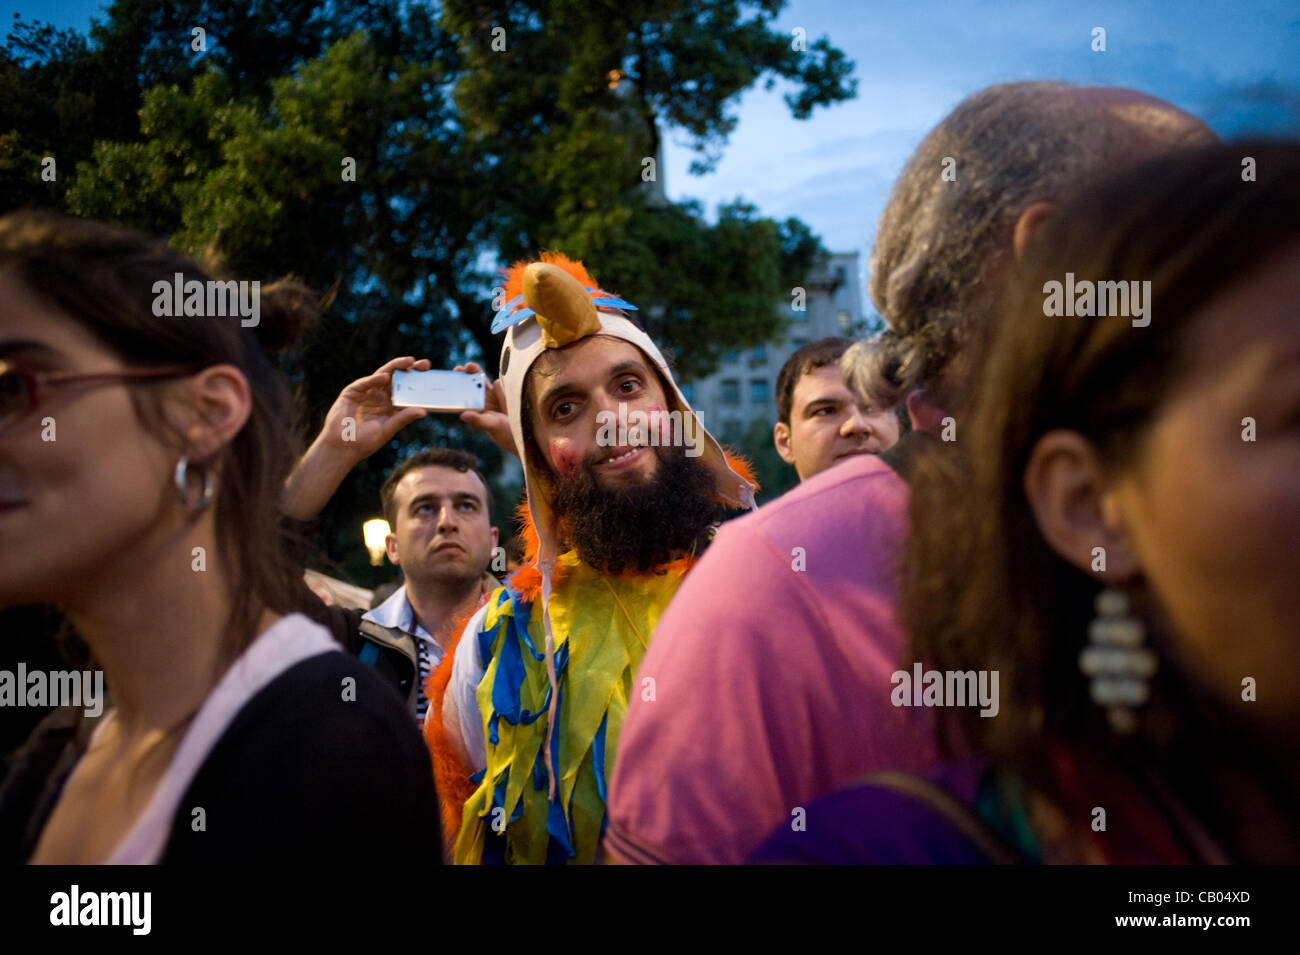 12 May, 2012-Barcelona, Spain. Man disguised as a bird during the march. On the anniversary of the indignant movement (born a year ago against the political and economic situation in Spain) thousands of people took to the streets recalling the same slogans with many allusions to the banks and the po Stock Photo